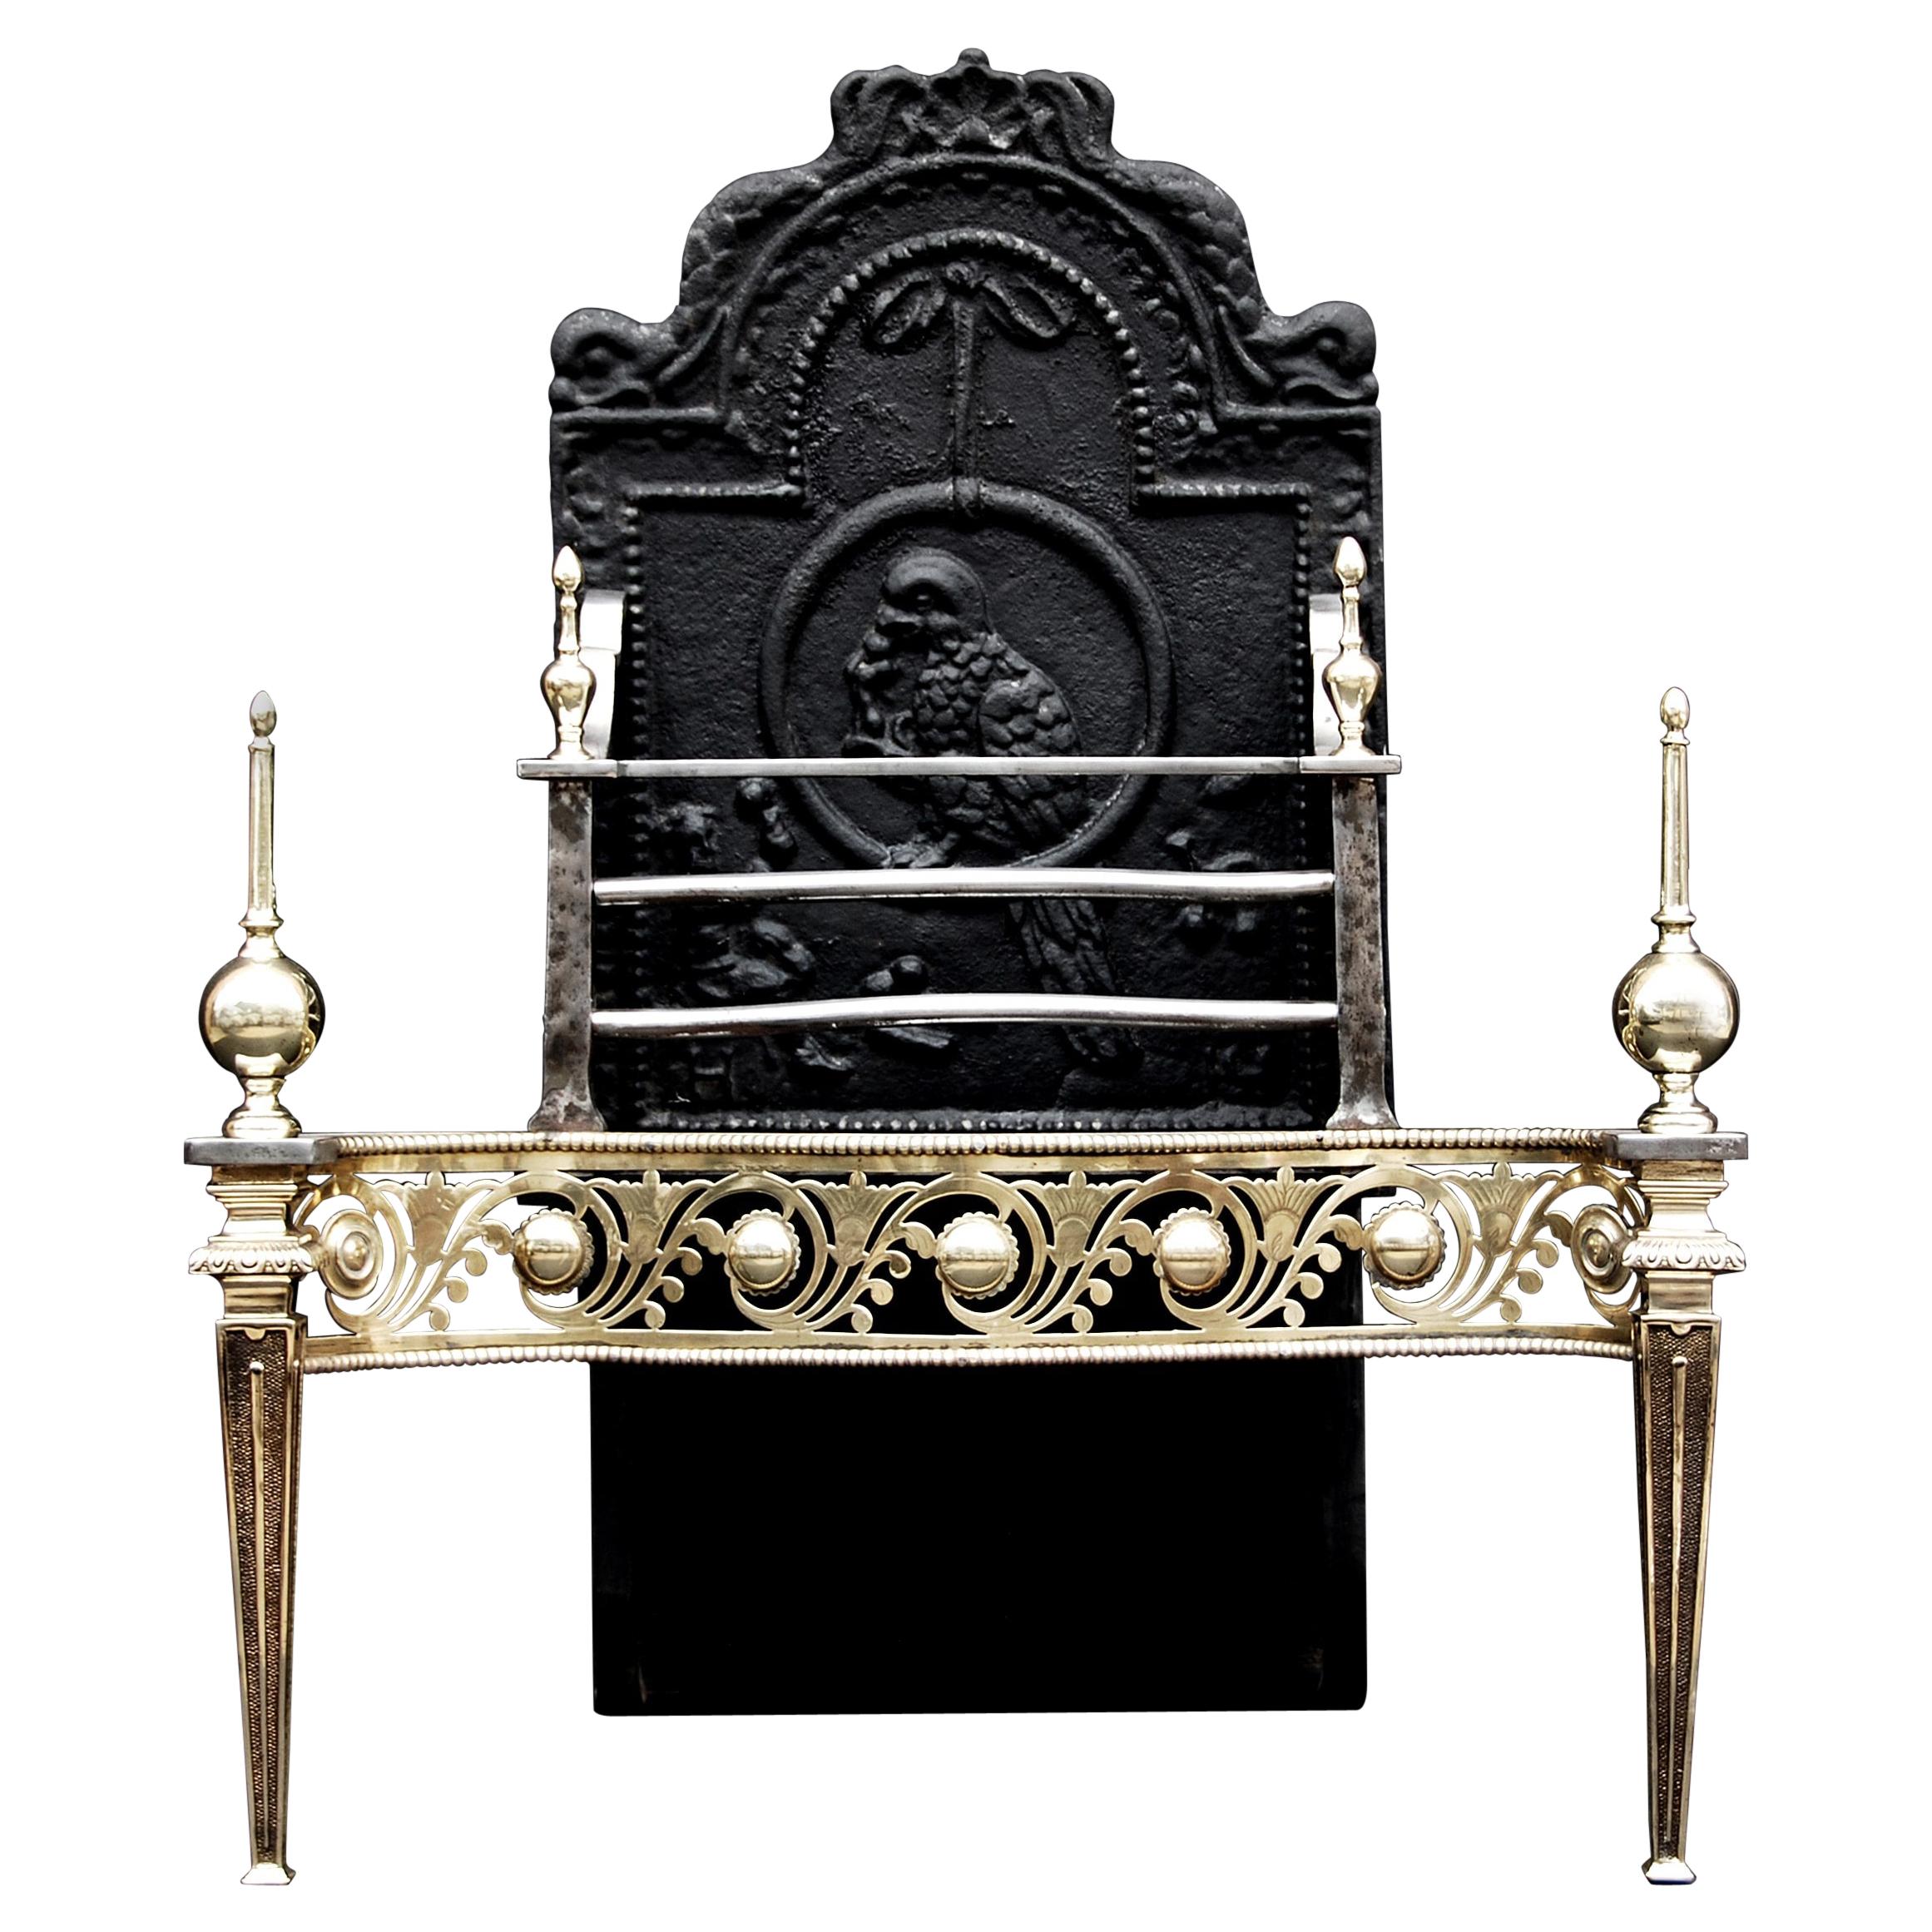 Fine Quality English Brass & Steel Firegrate with Ornate Fret